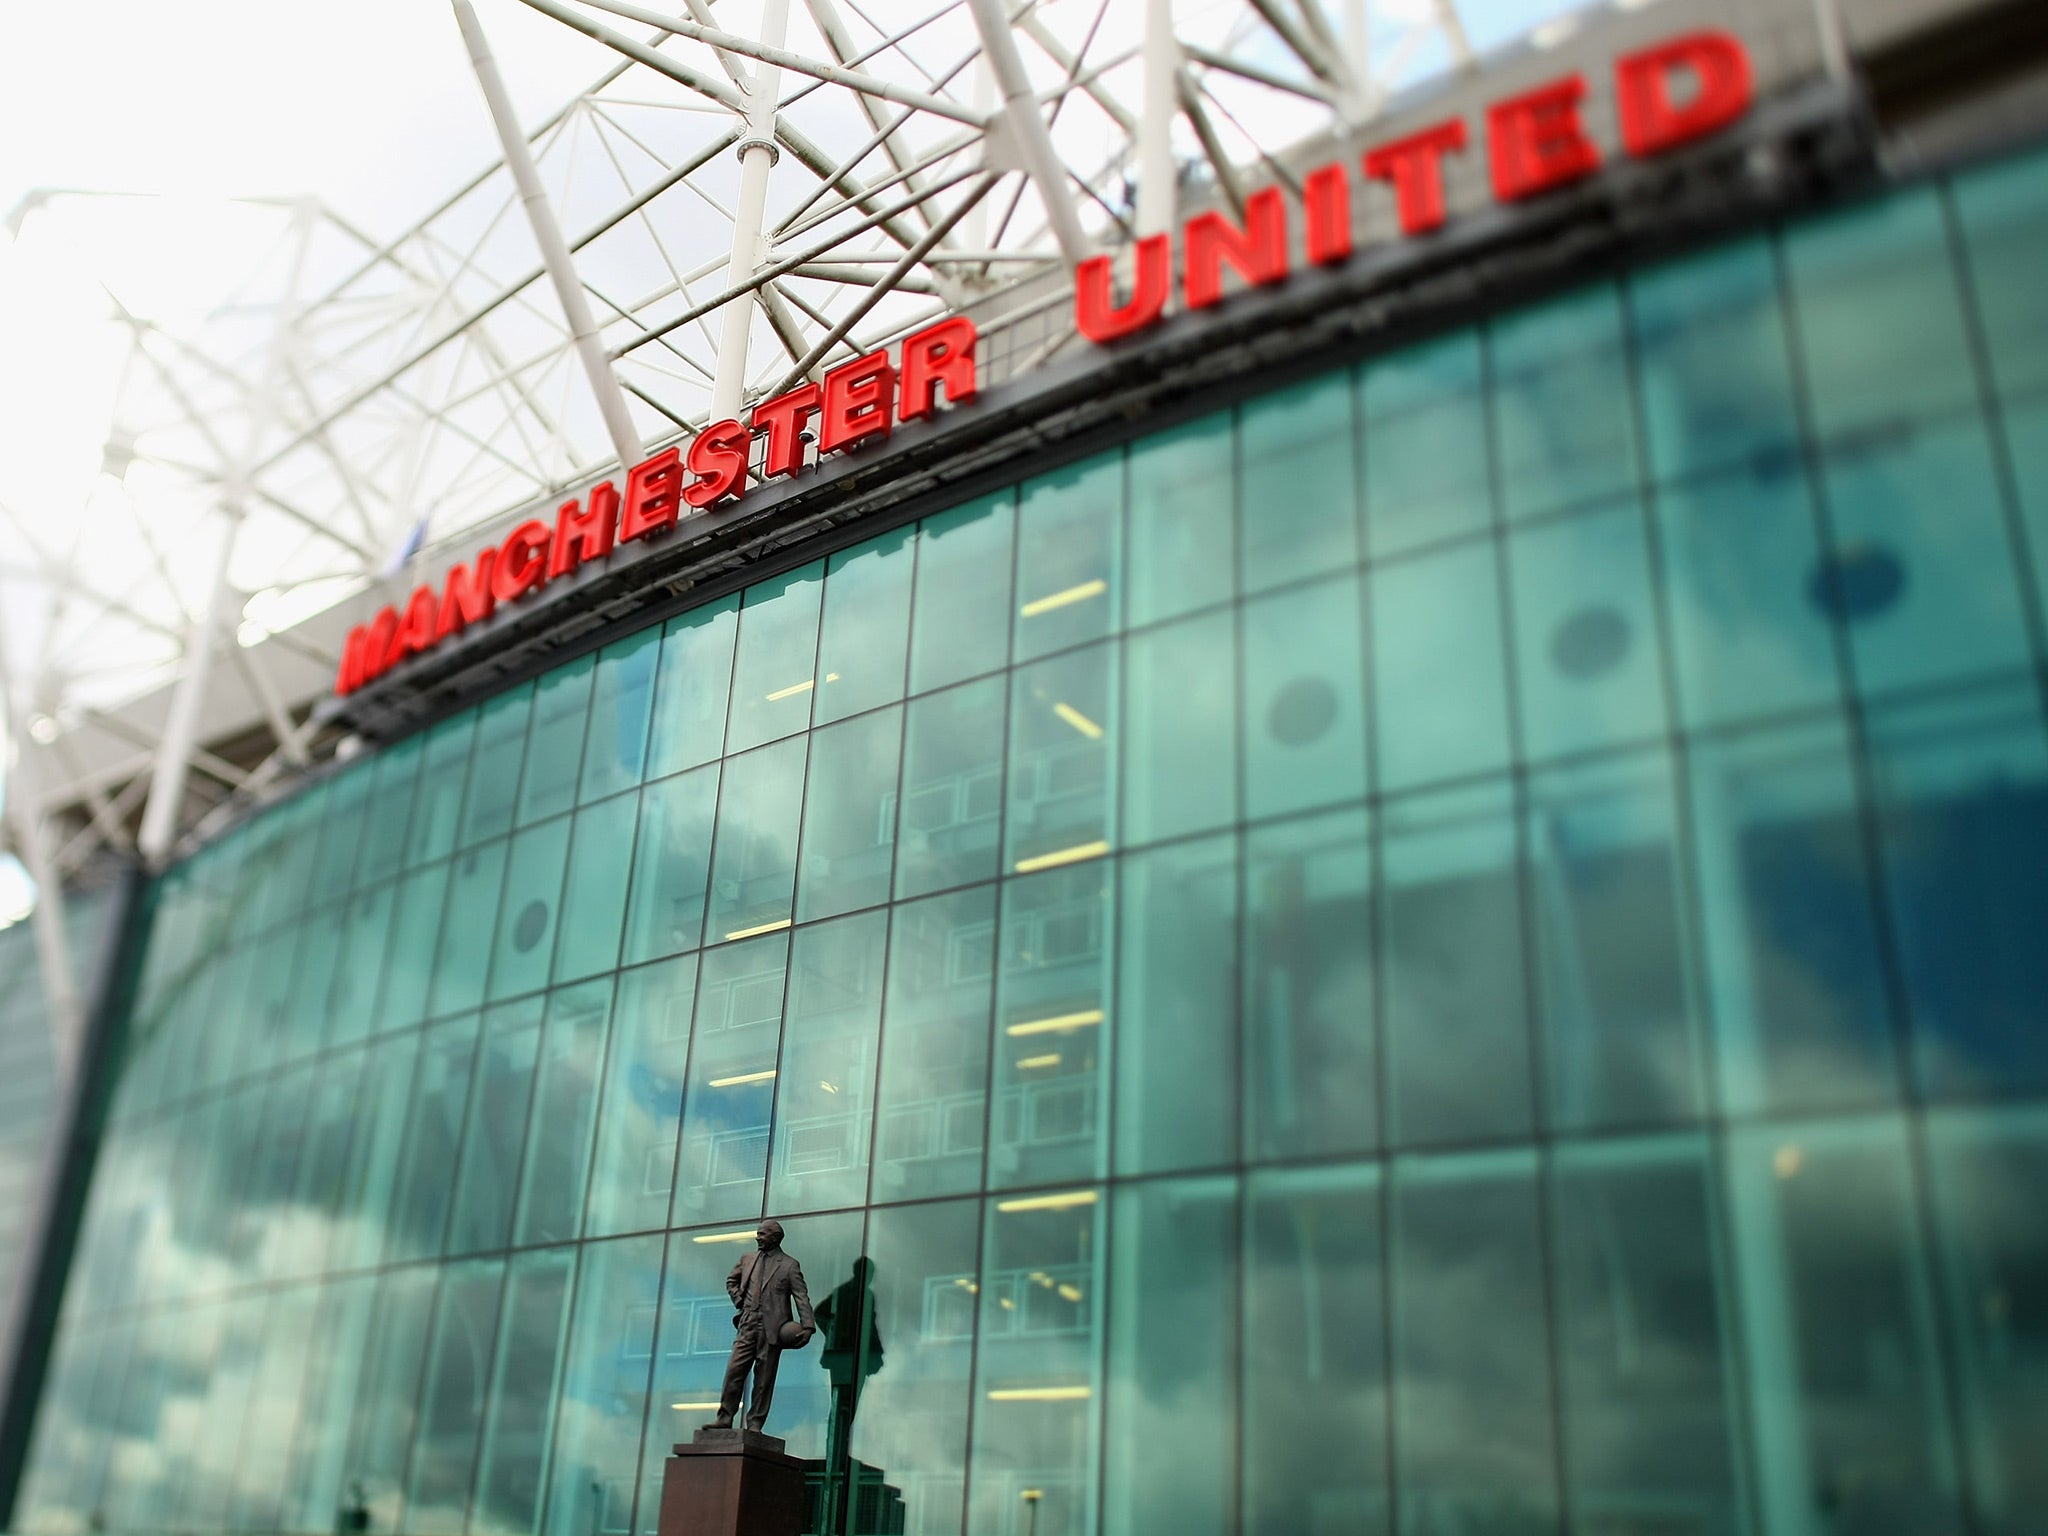 Old Trafford, Manchester United's home ground